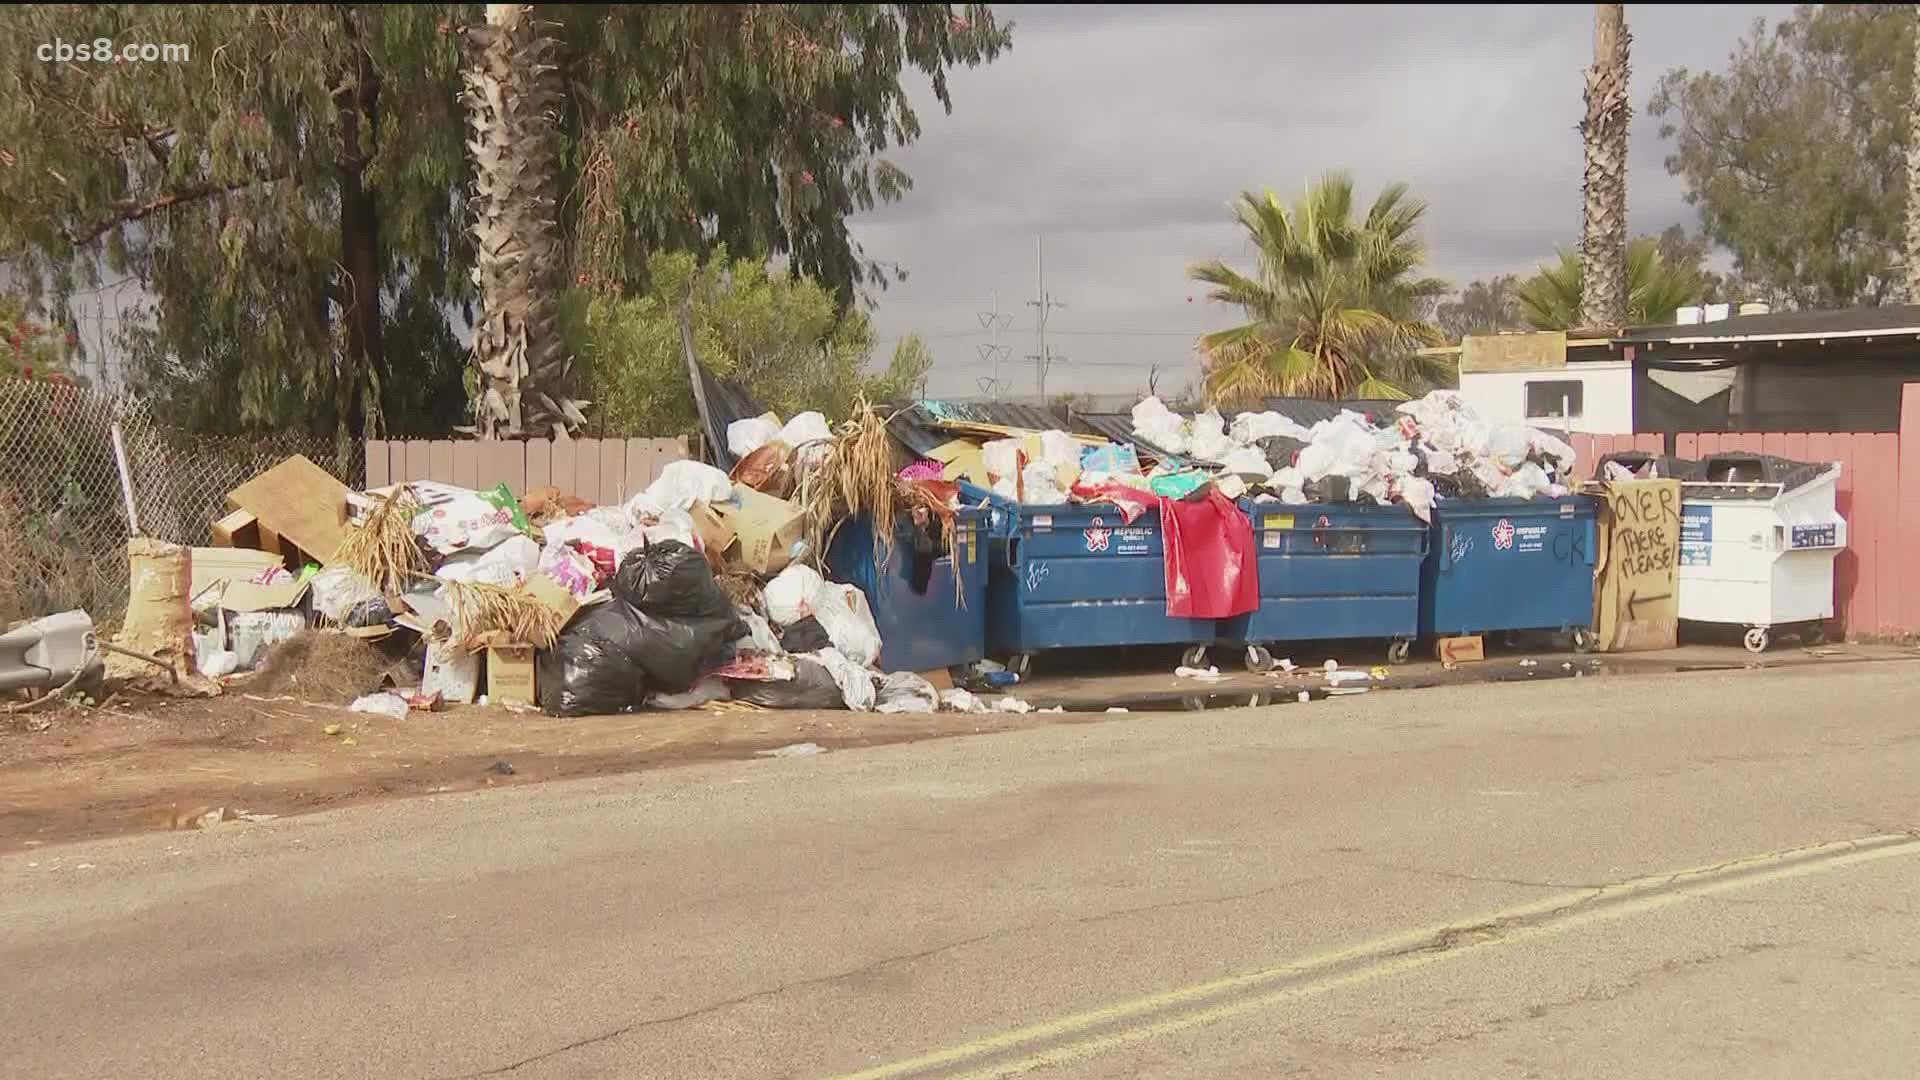 Chula Vista's mayor said she’s frustrated about what she called a fight over pennies between Republic Services and sanitation workers.